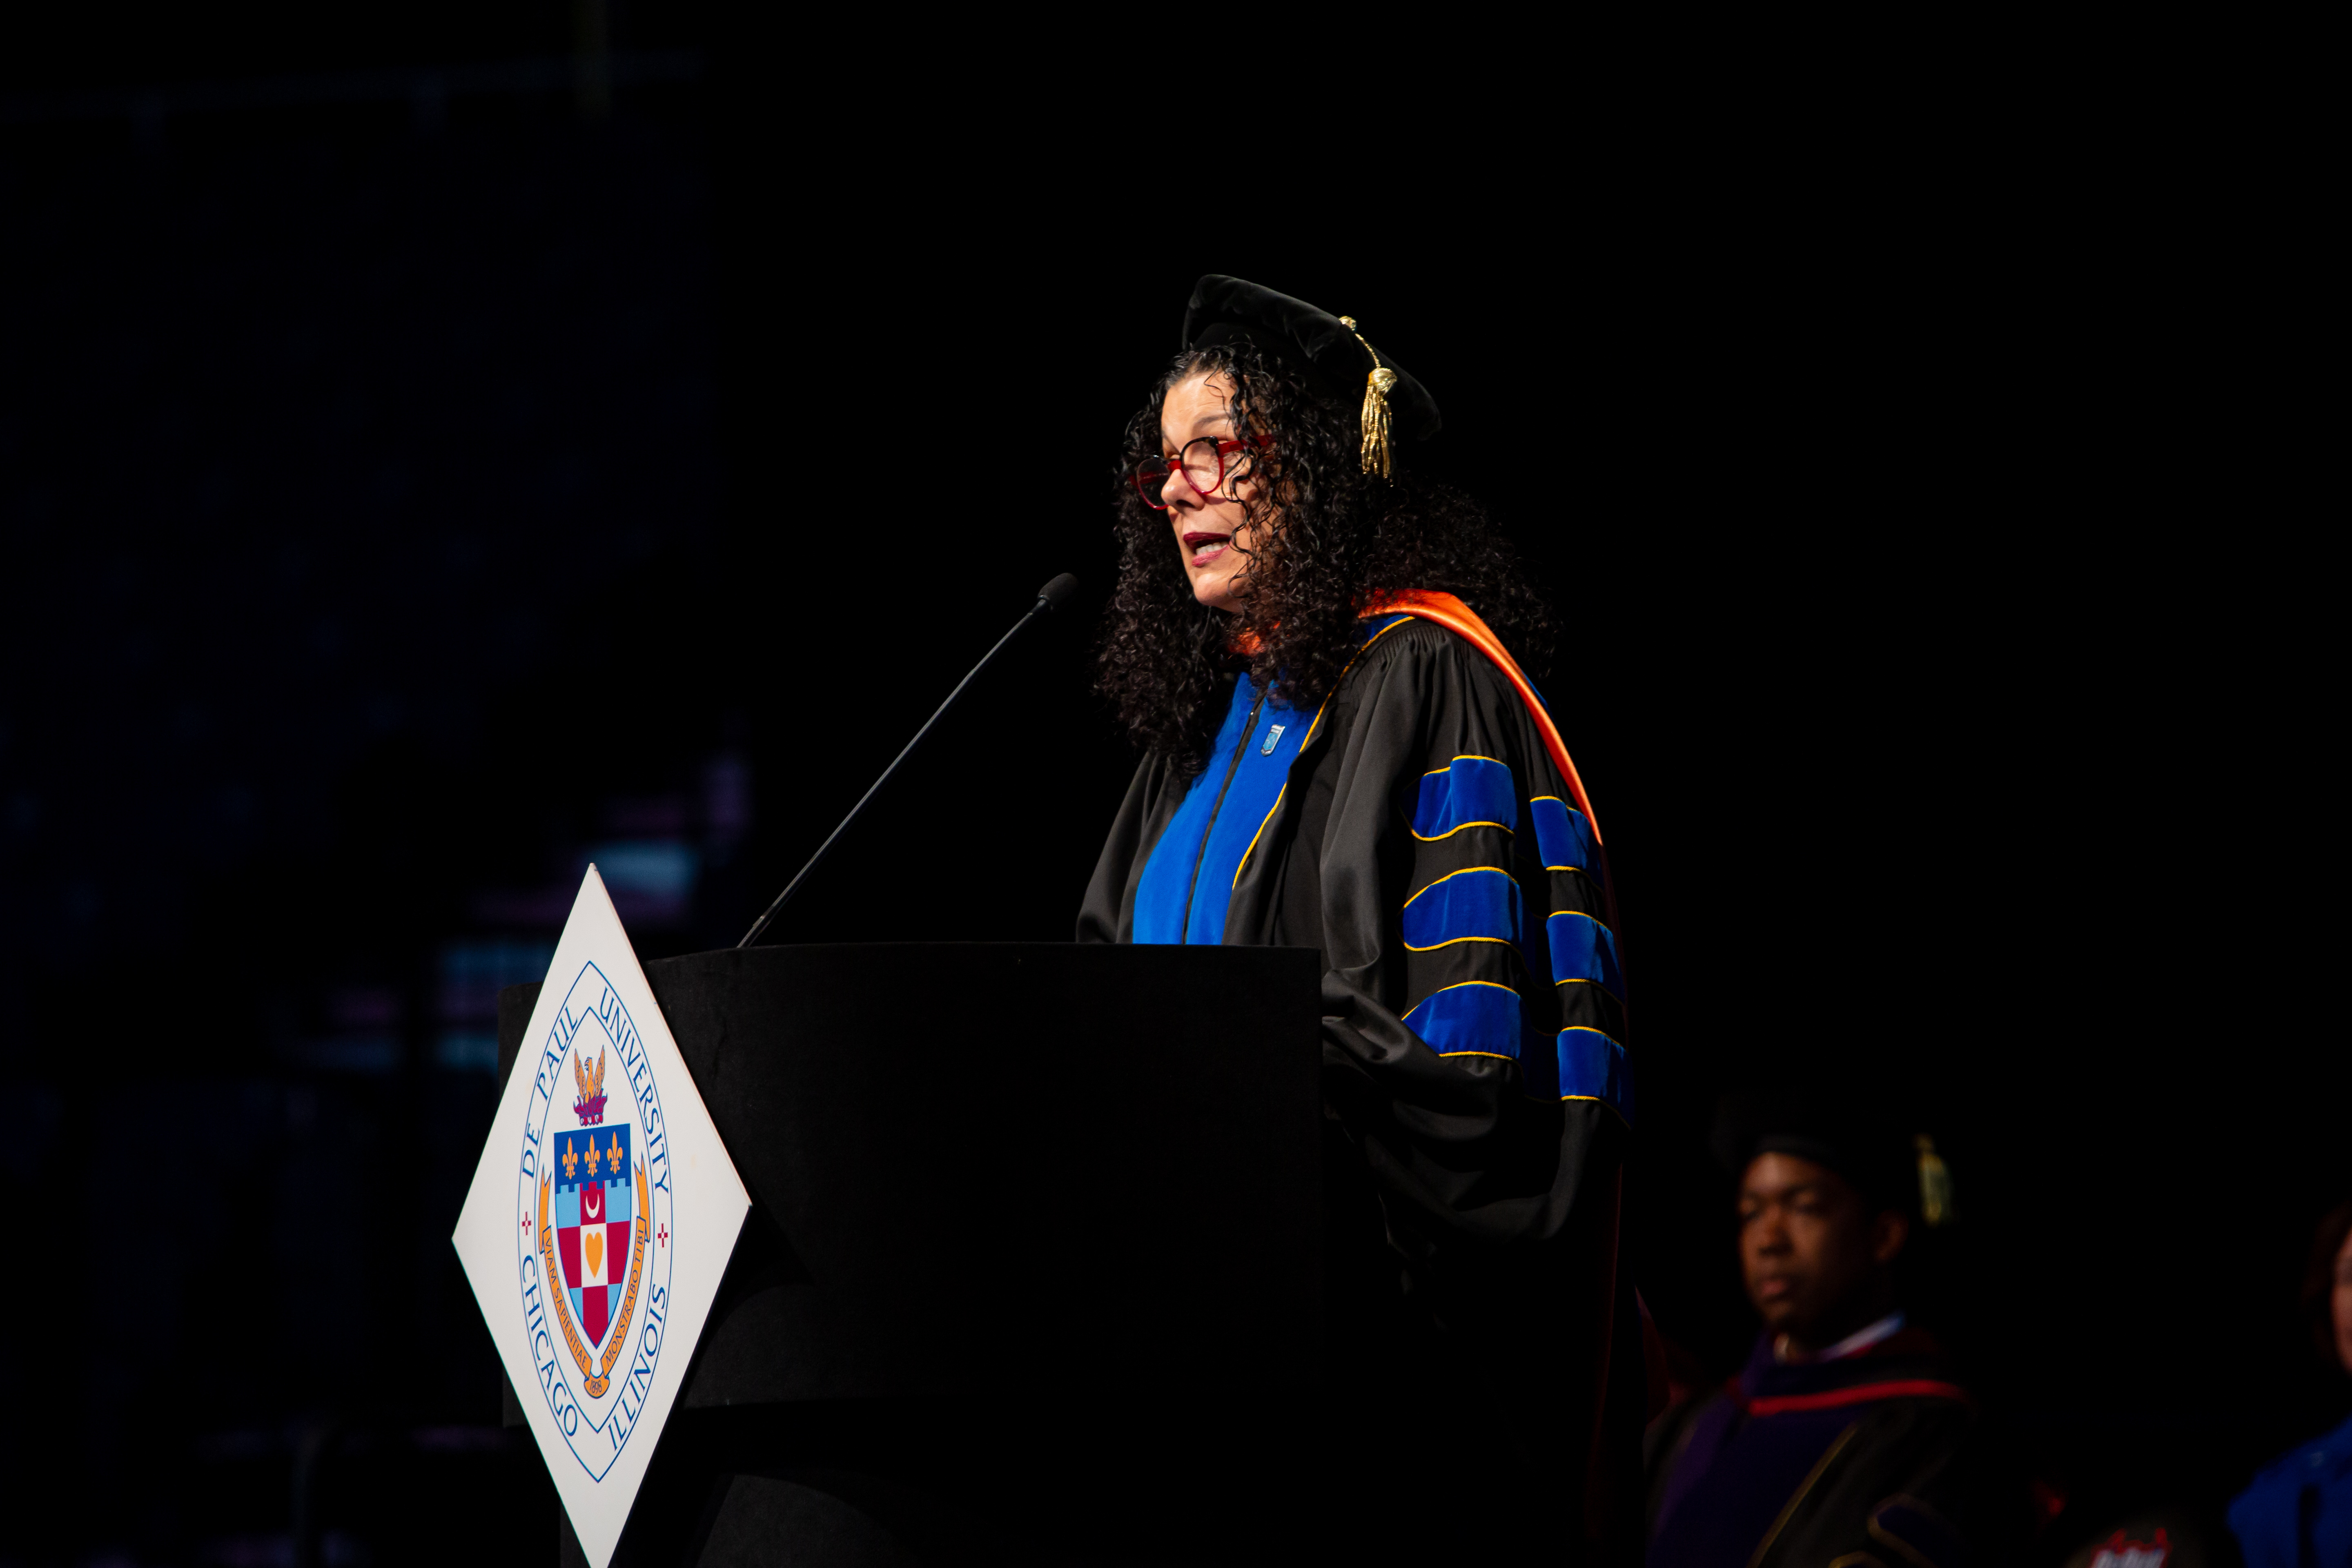 Salma Ghanem, interim provost, introduced each of DePaul’s 10 deans and encouraged students from their respective schools to cheer the loudest for their dean. (DePaul University/Randall Spriggs)